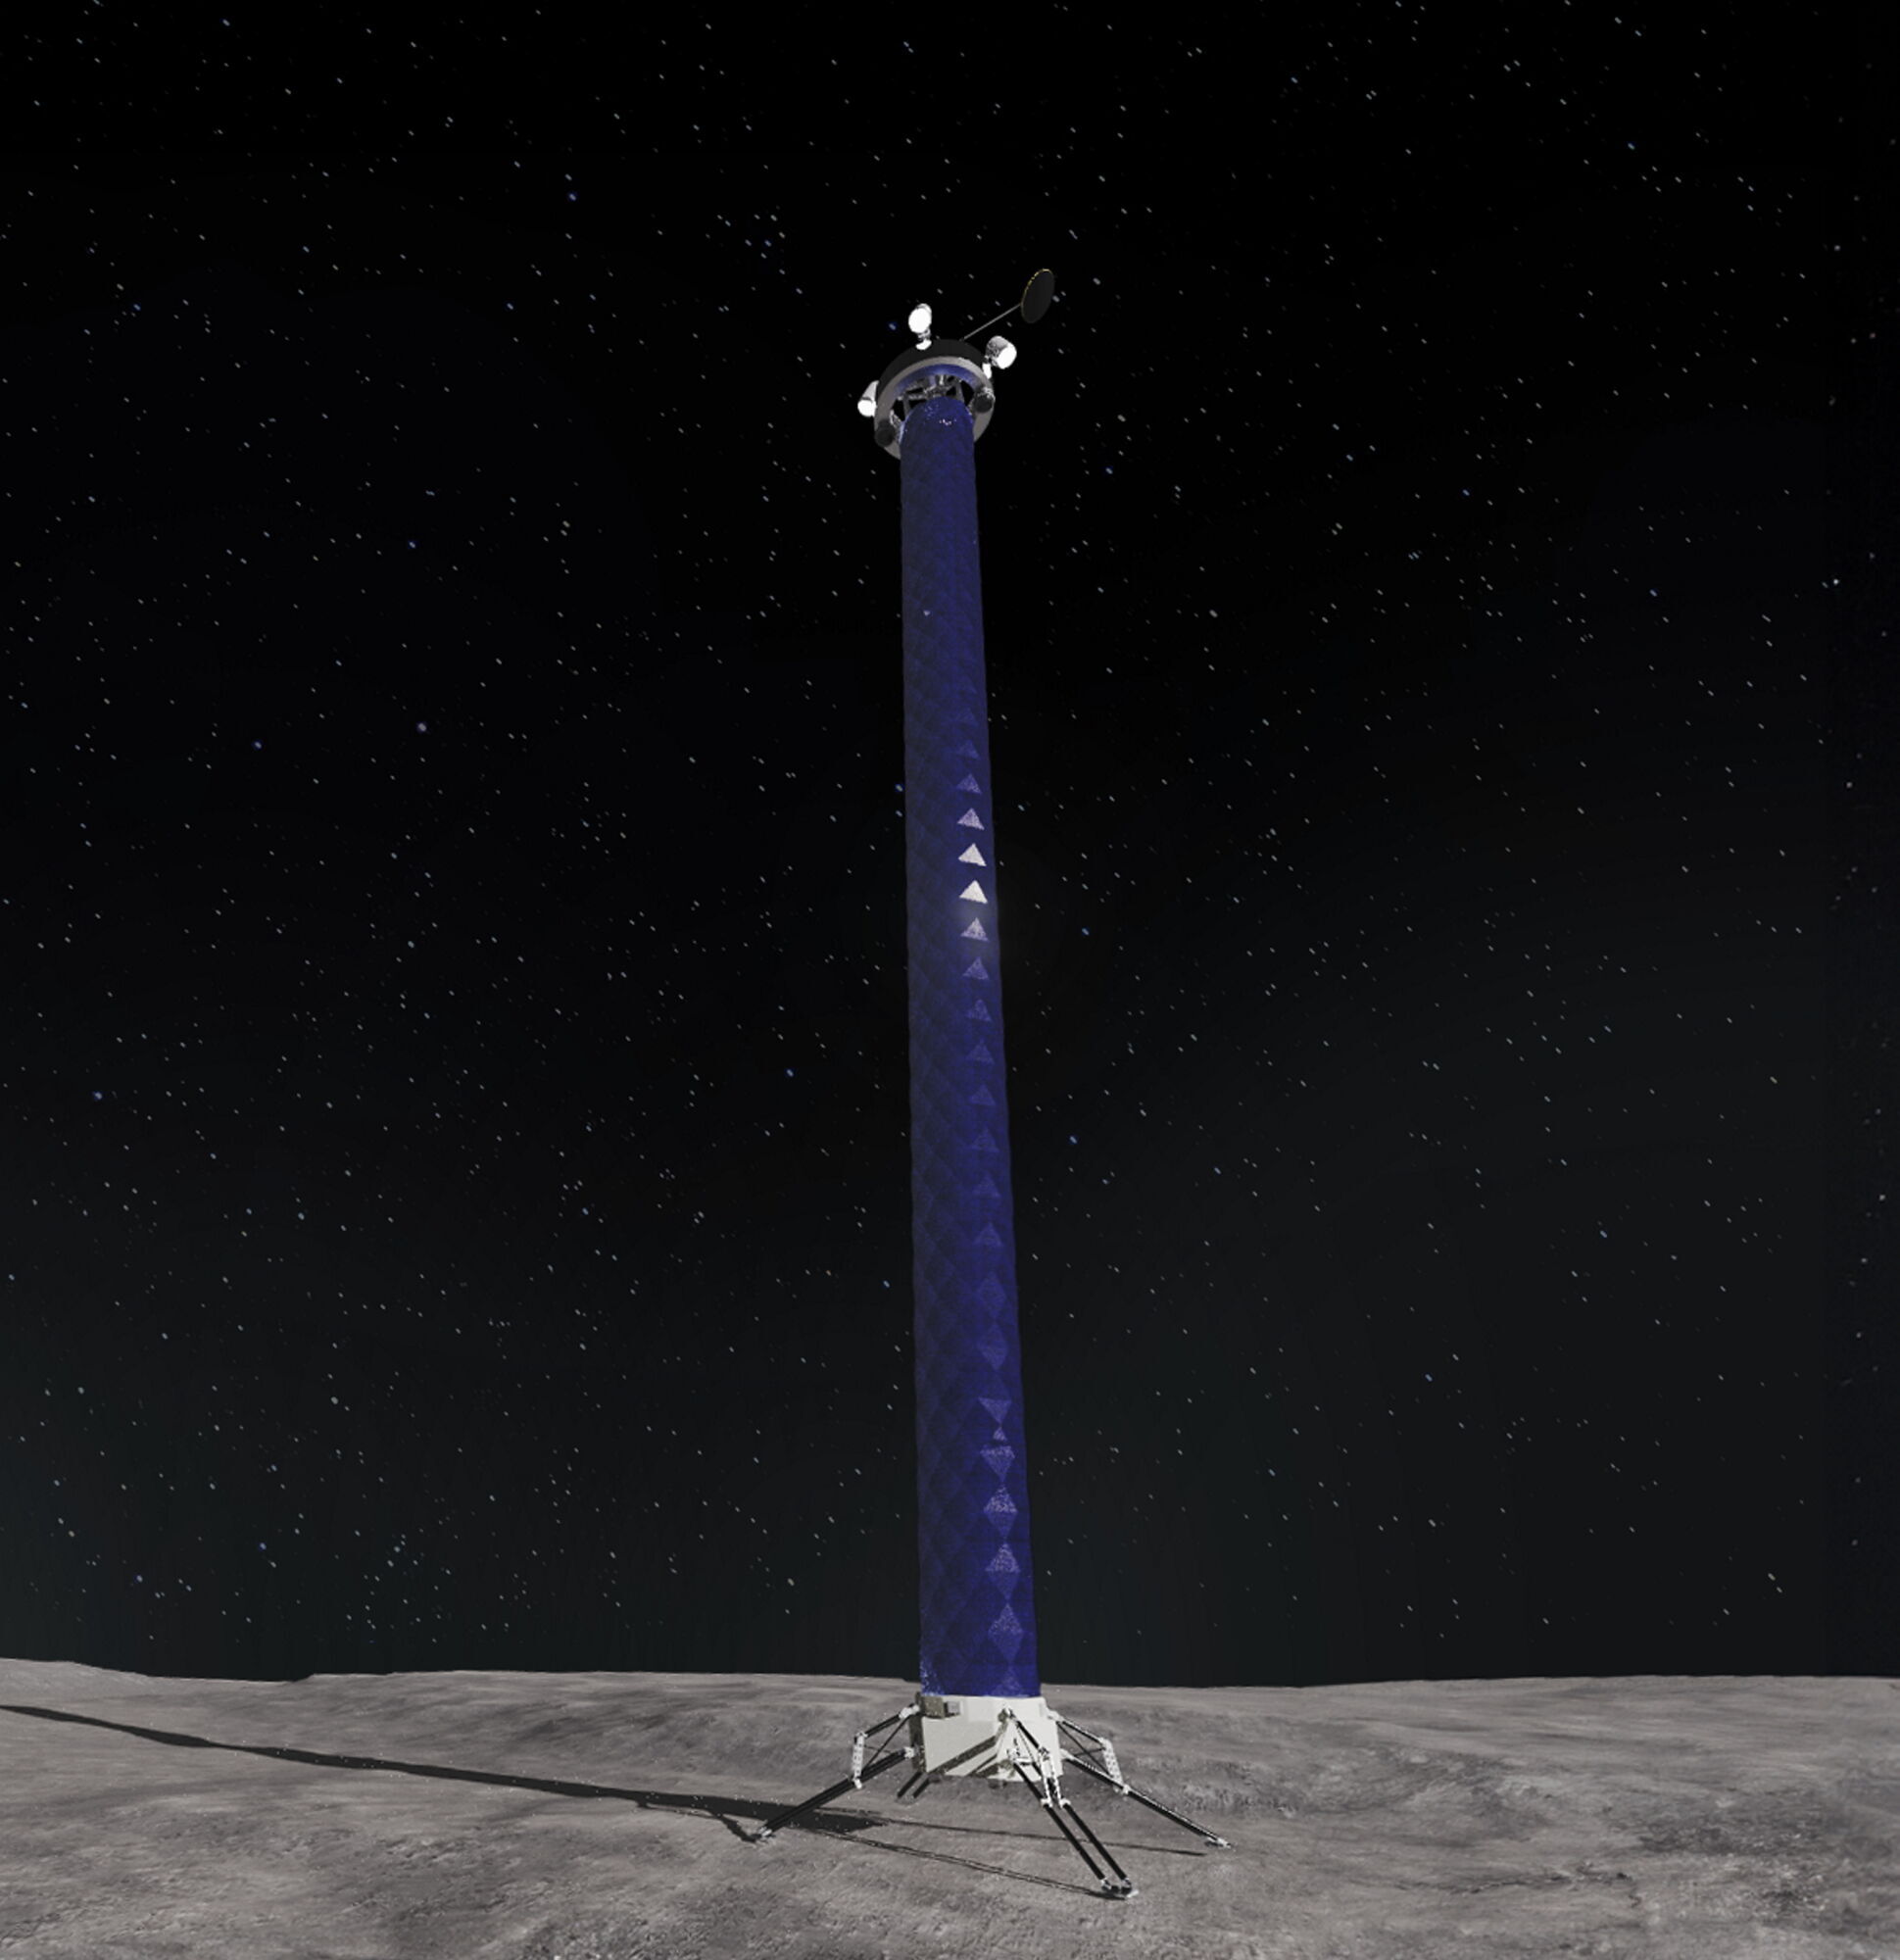 100-meter towers on the moon